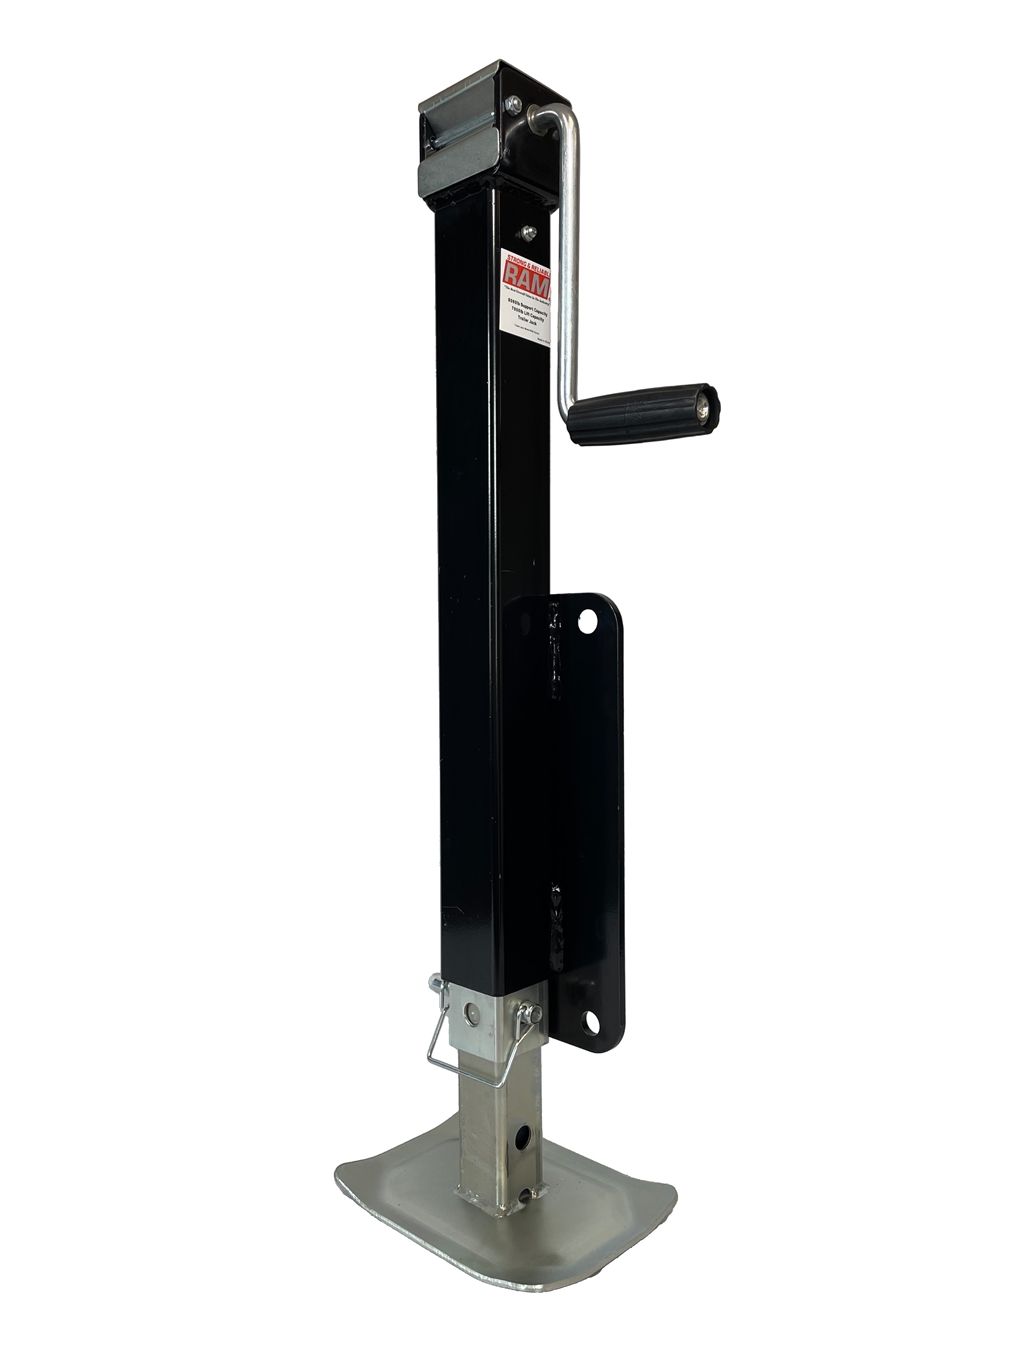 Ram Trailer Jack - 8,000 lb. Support Capacity With Mounting Plate Attached and Drop Leg